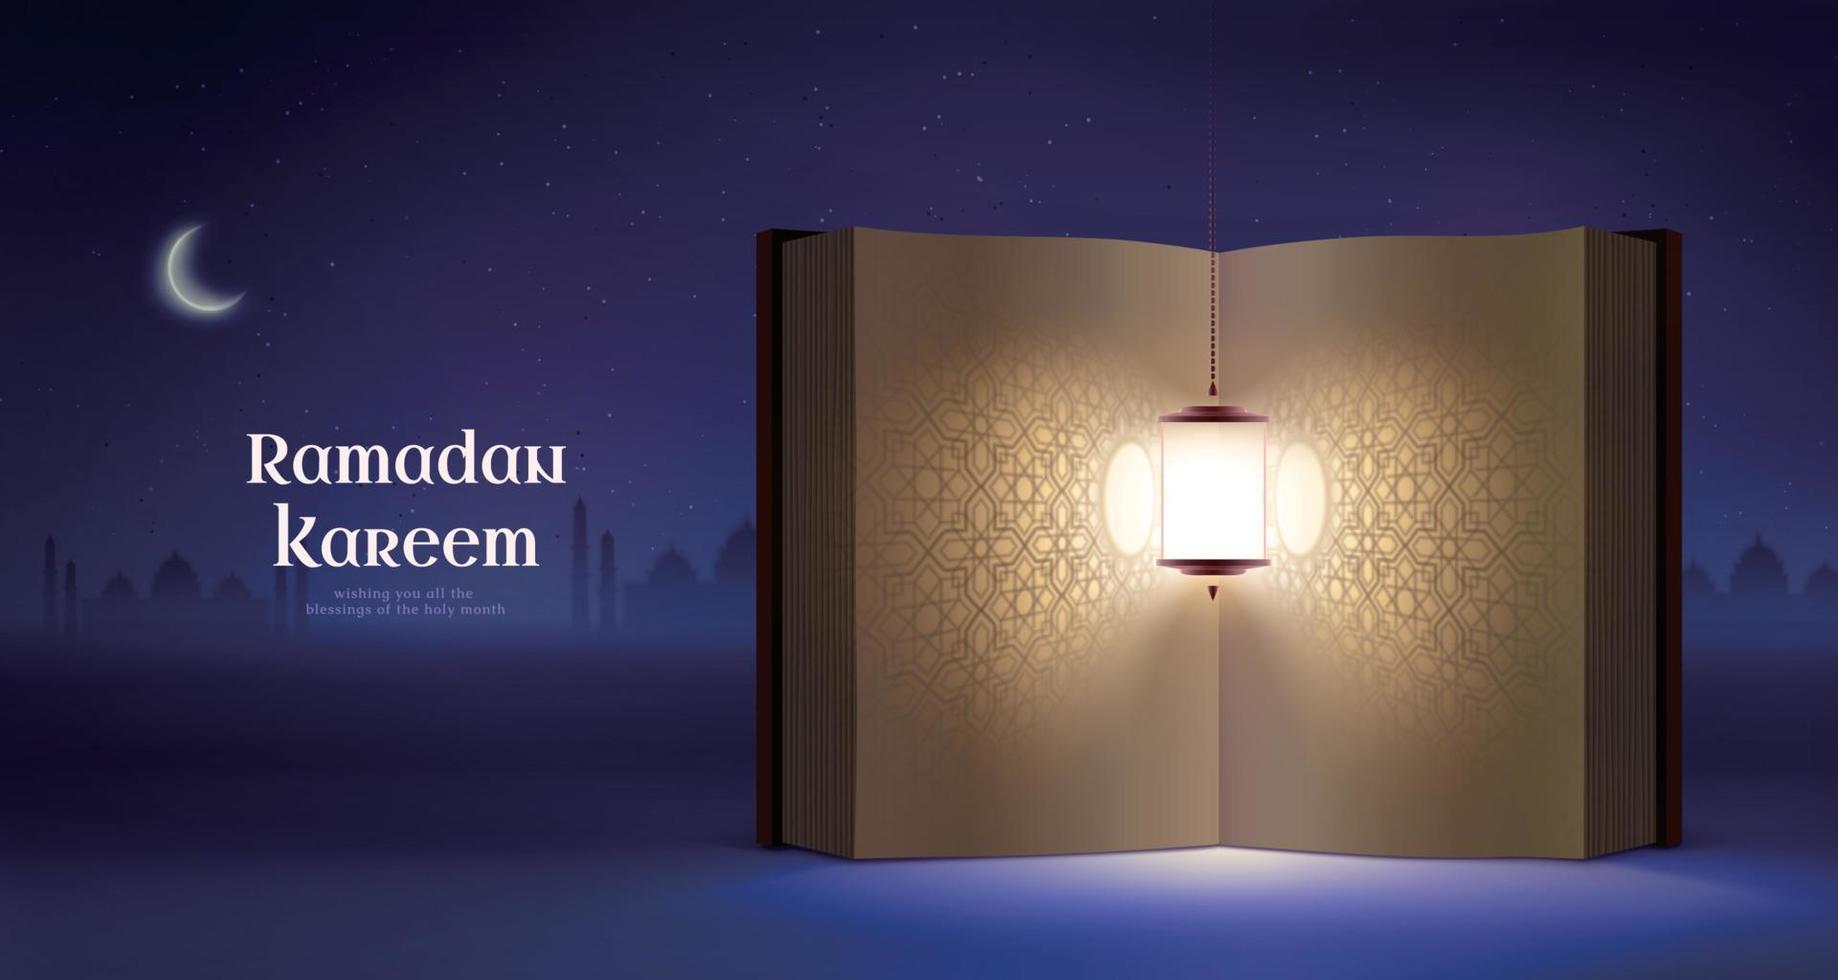 The holy book of Quran opened to the page of arabesque pattern with a shinning fanous lantern hanging from above. Illustration on purple starry night background vector